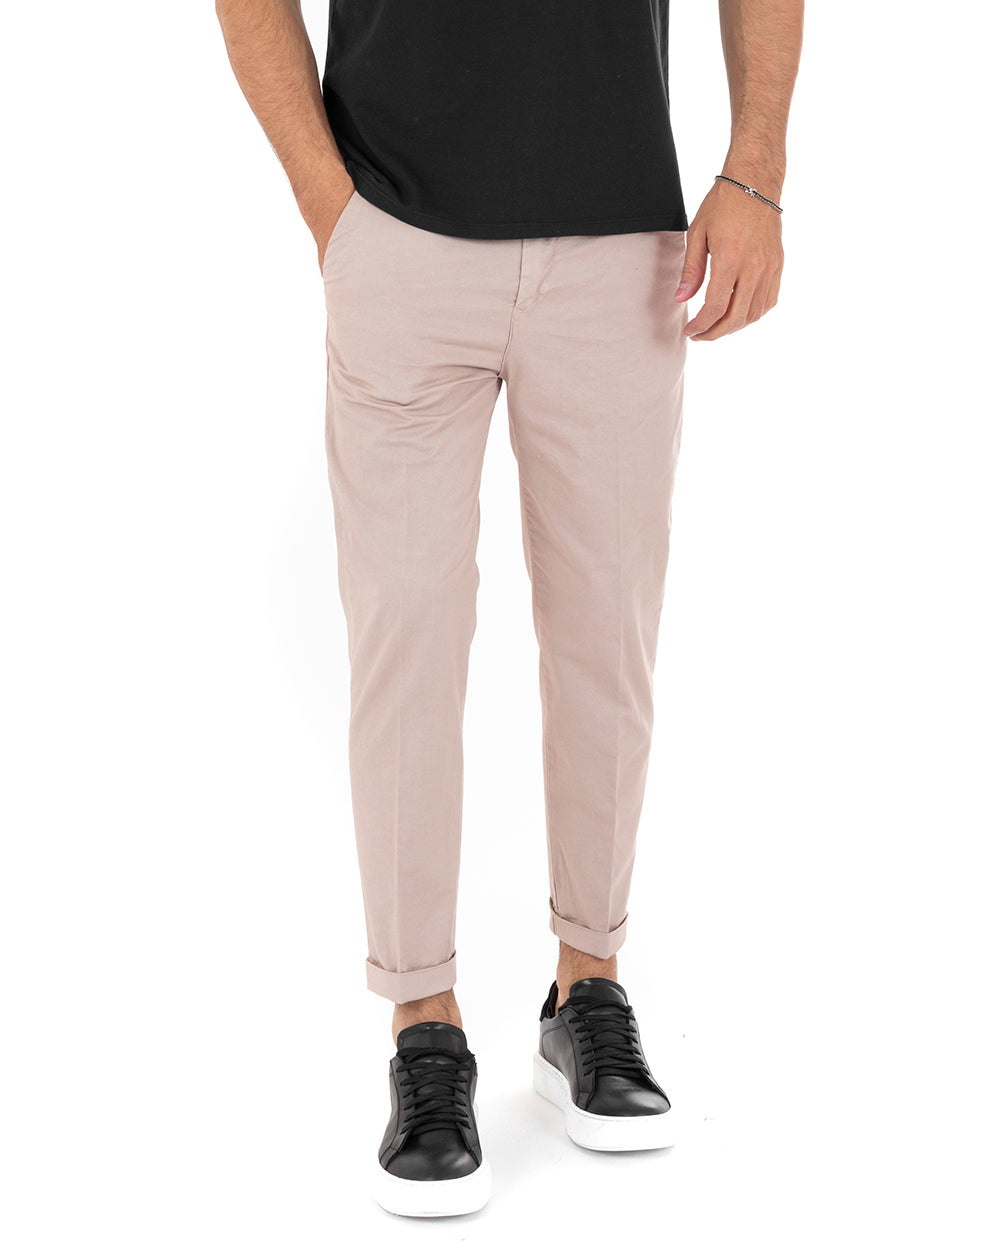 Men's Classic Basic Long Solid Color Casual Black America Pocket Trousers GIOSAL-P5695A